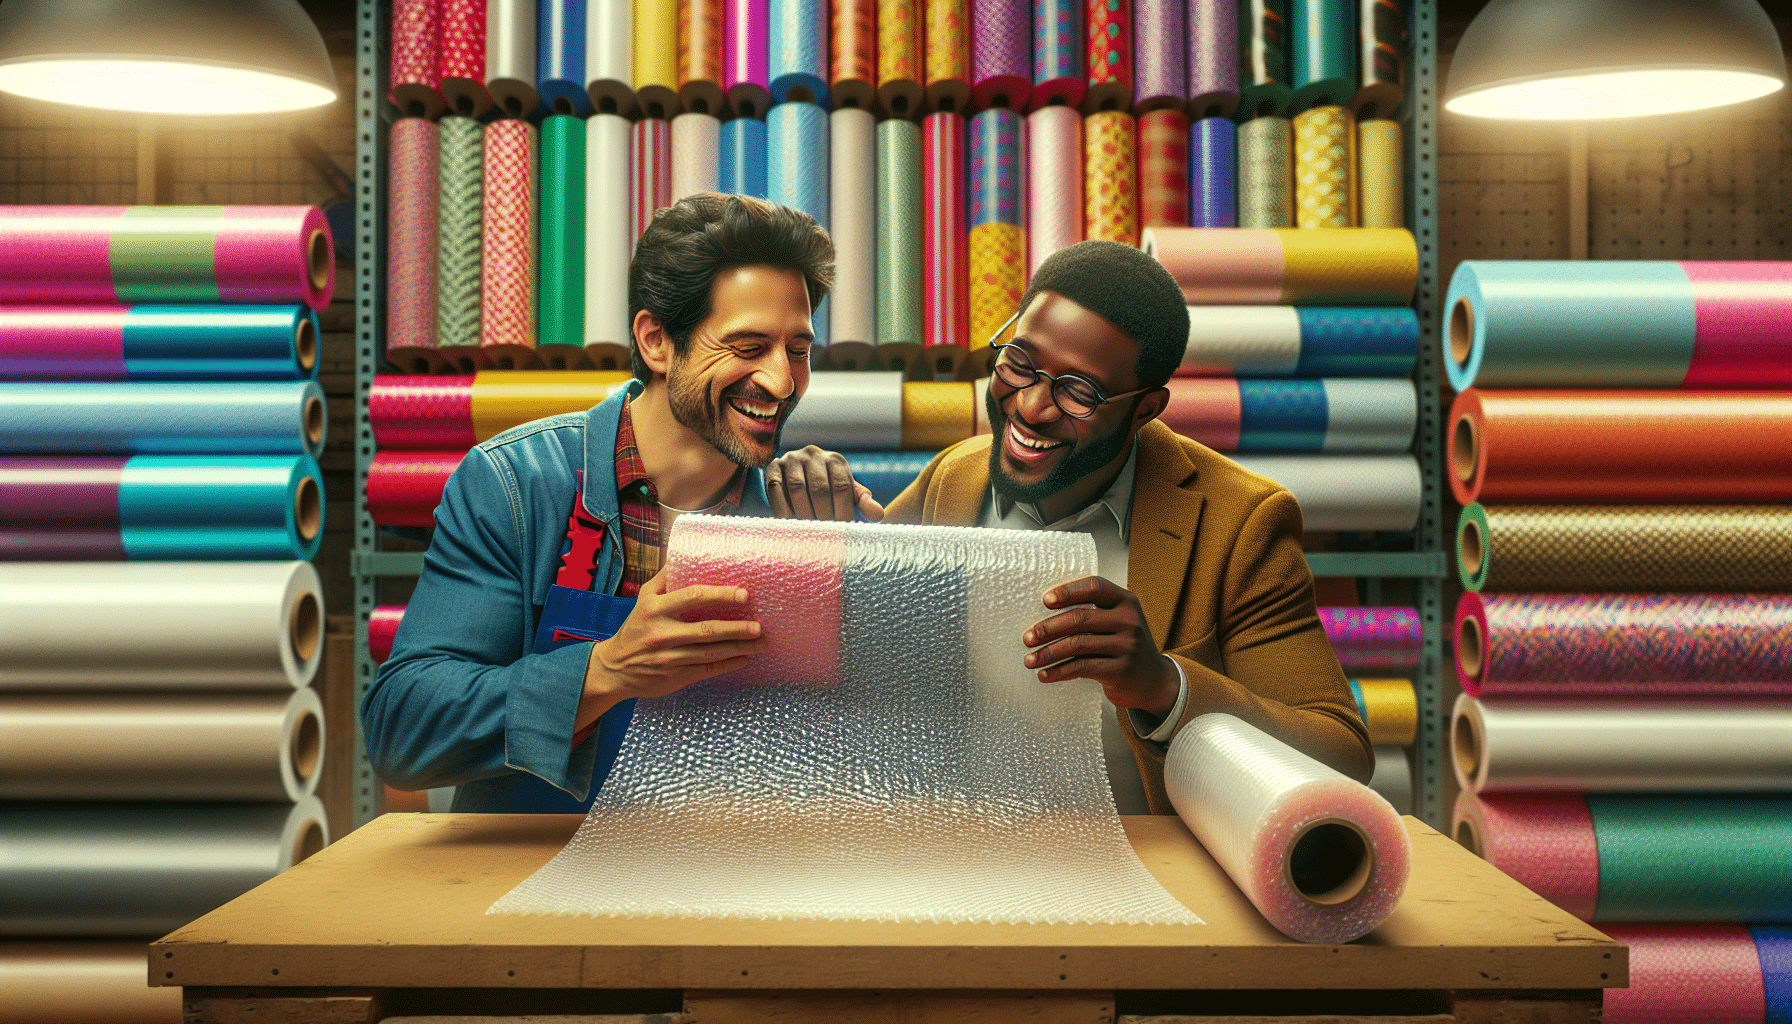 Inventors fielding and chavannes marvel at bubble wrap discovery